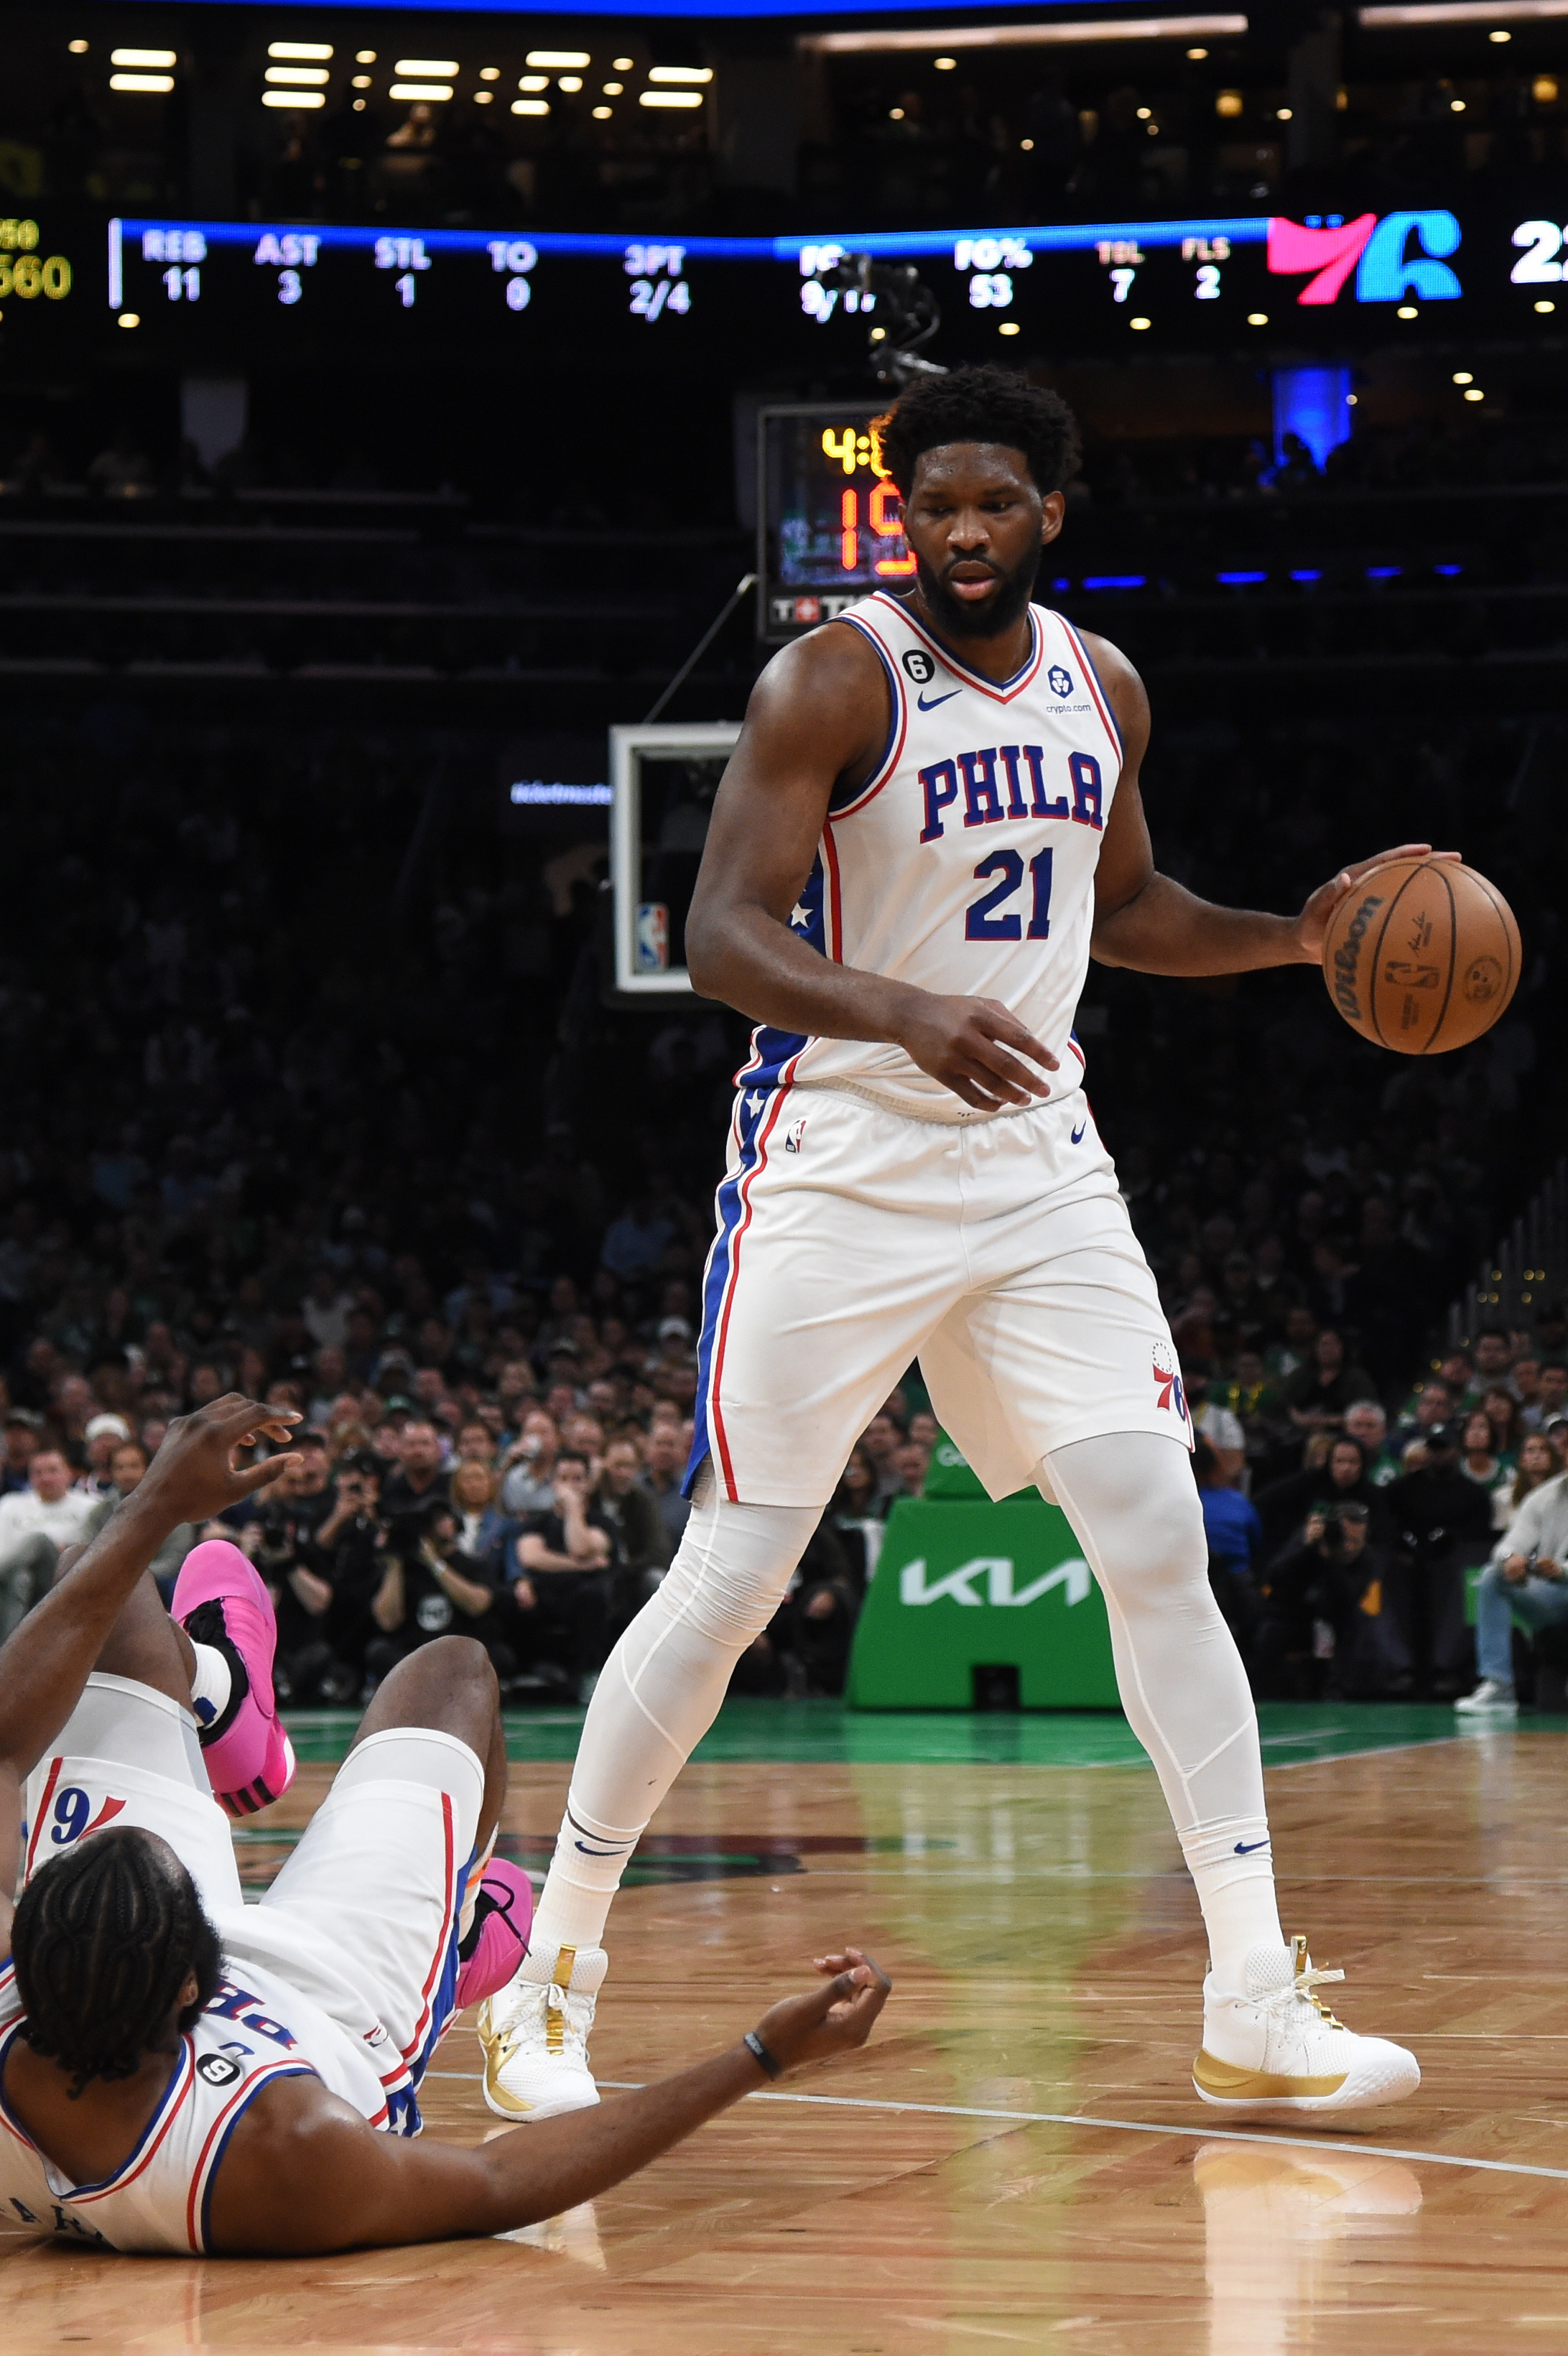 NBA playoffs: Joel Embiid's 33 lift Sixers over Celtics in pivotal Game 5, NBA